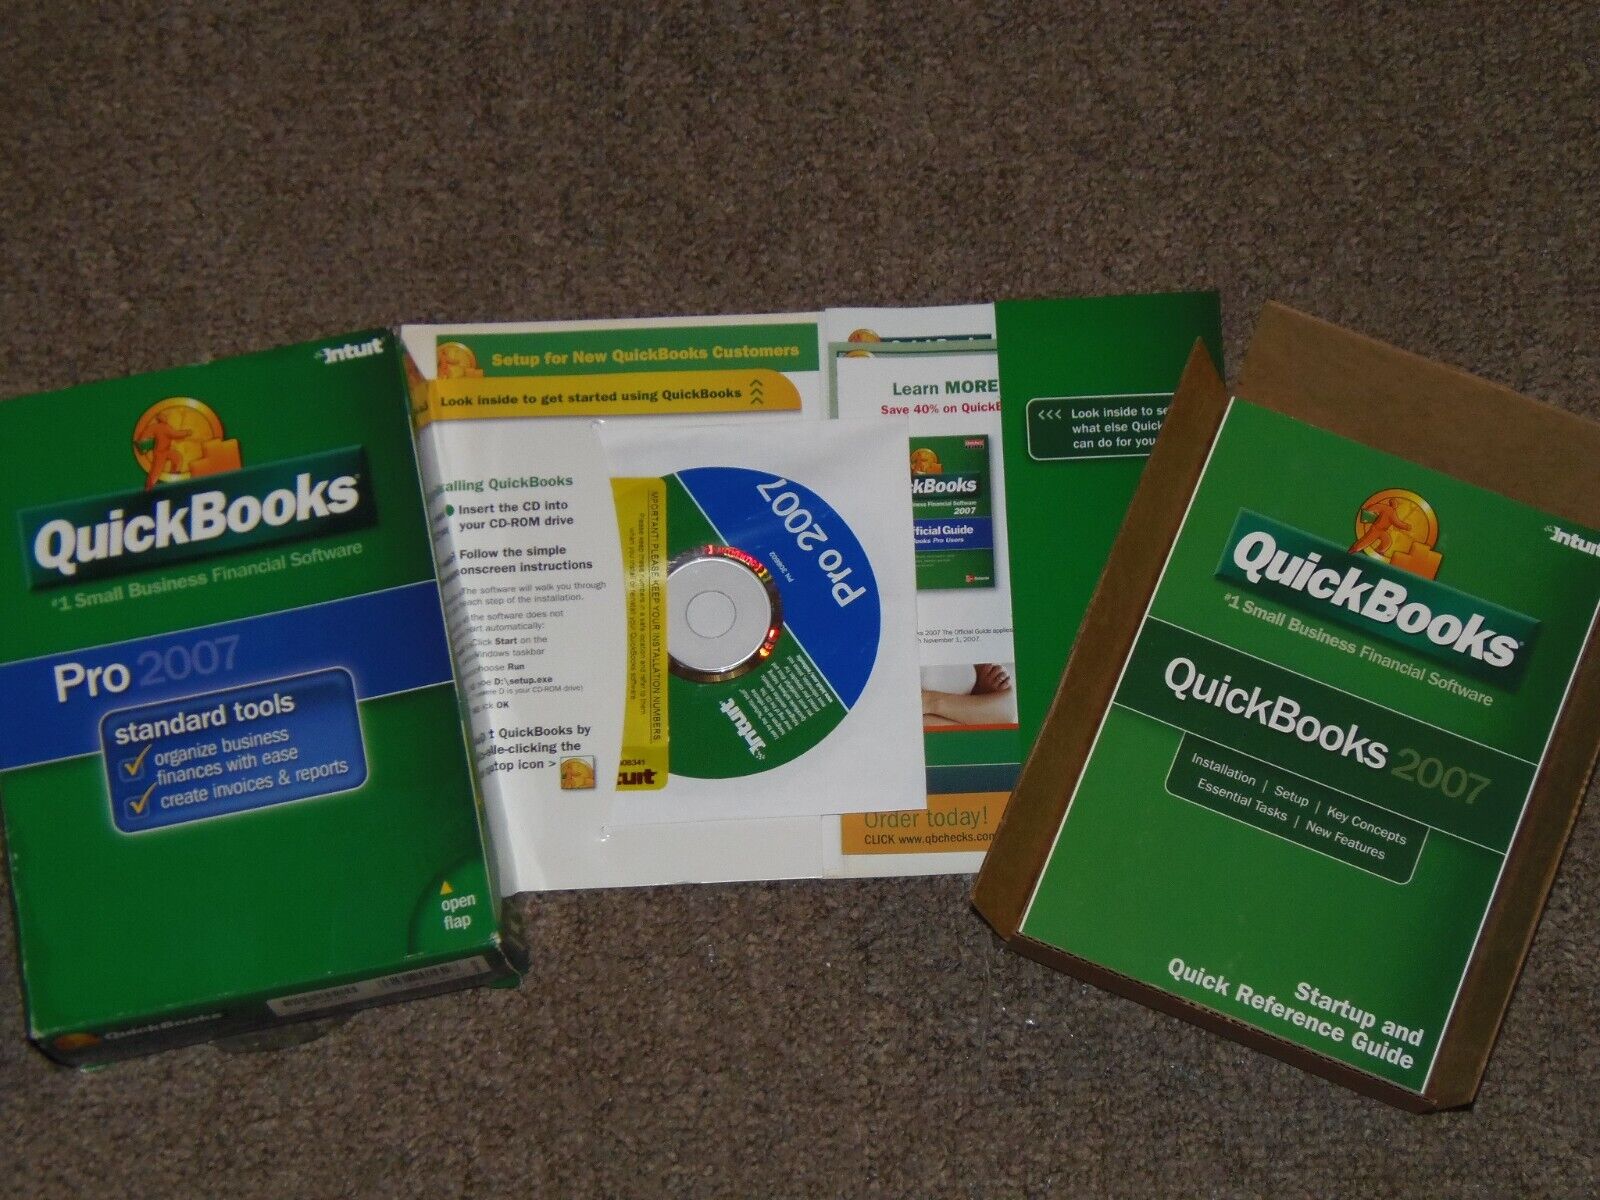 Intuit Quickbooks Pro 2007 #1 Small Business Financial Software New Open Box